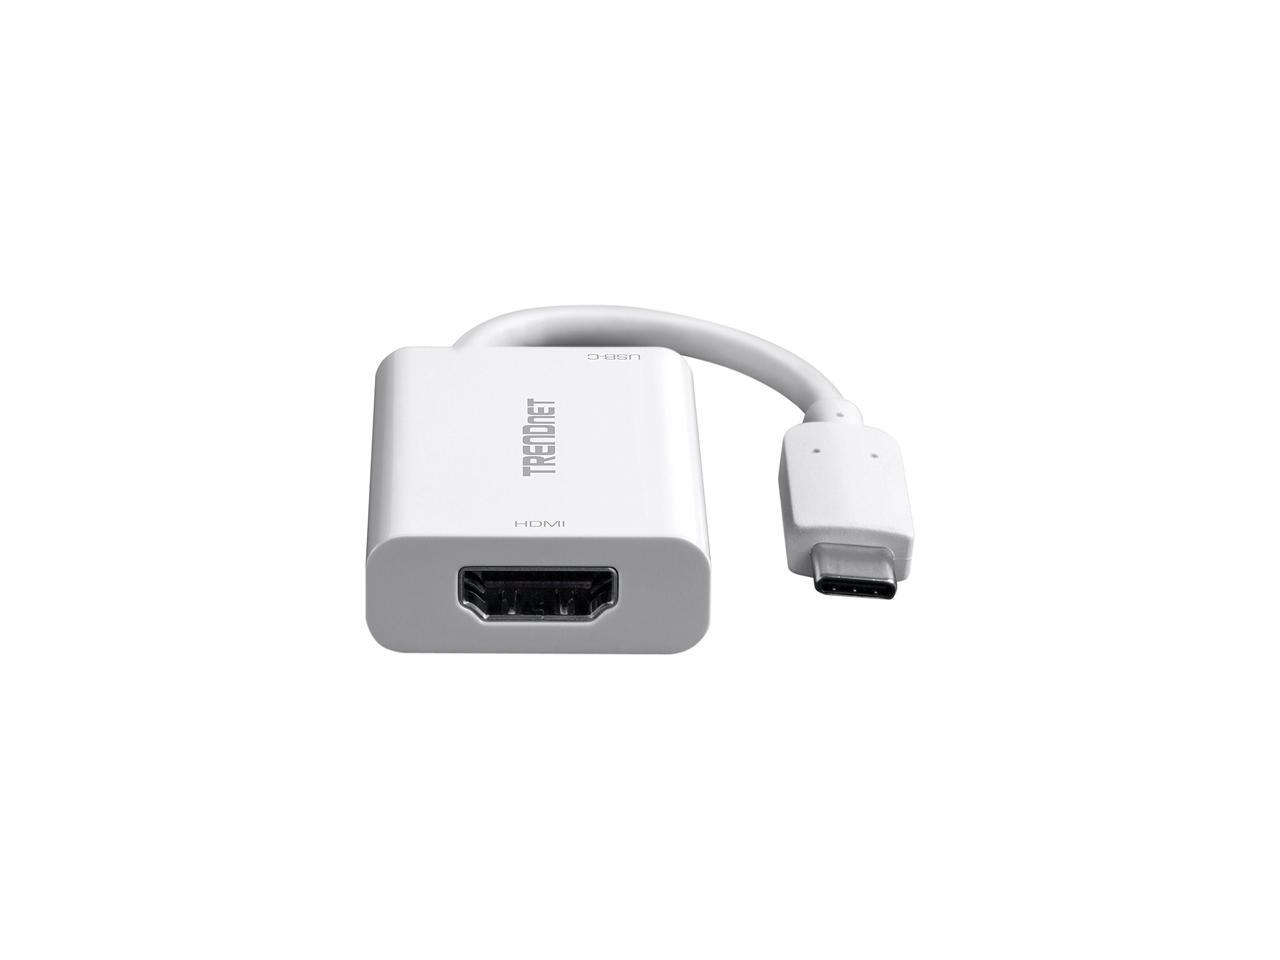 TRENDnet TUC-HDMI2 USB-C to HDMI Adapter with Power Delivery